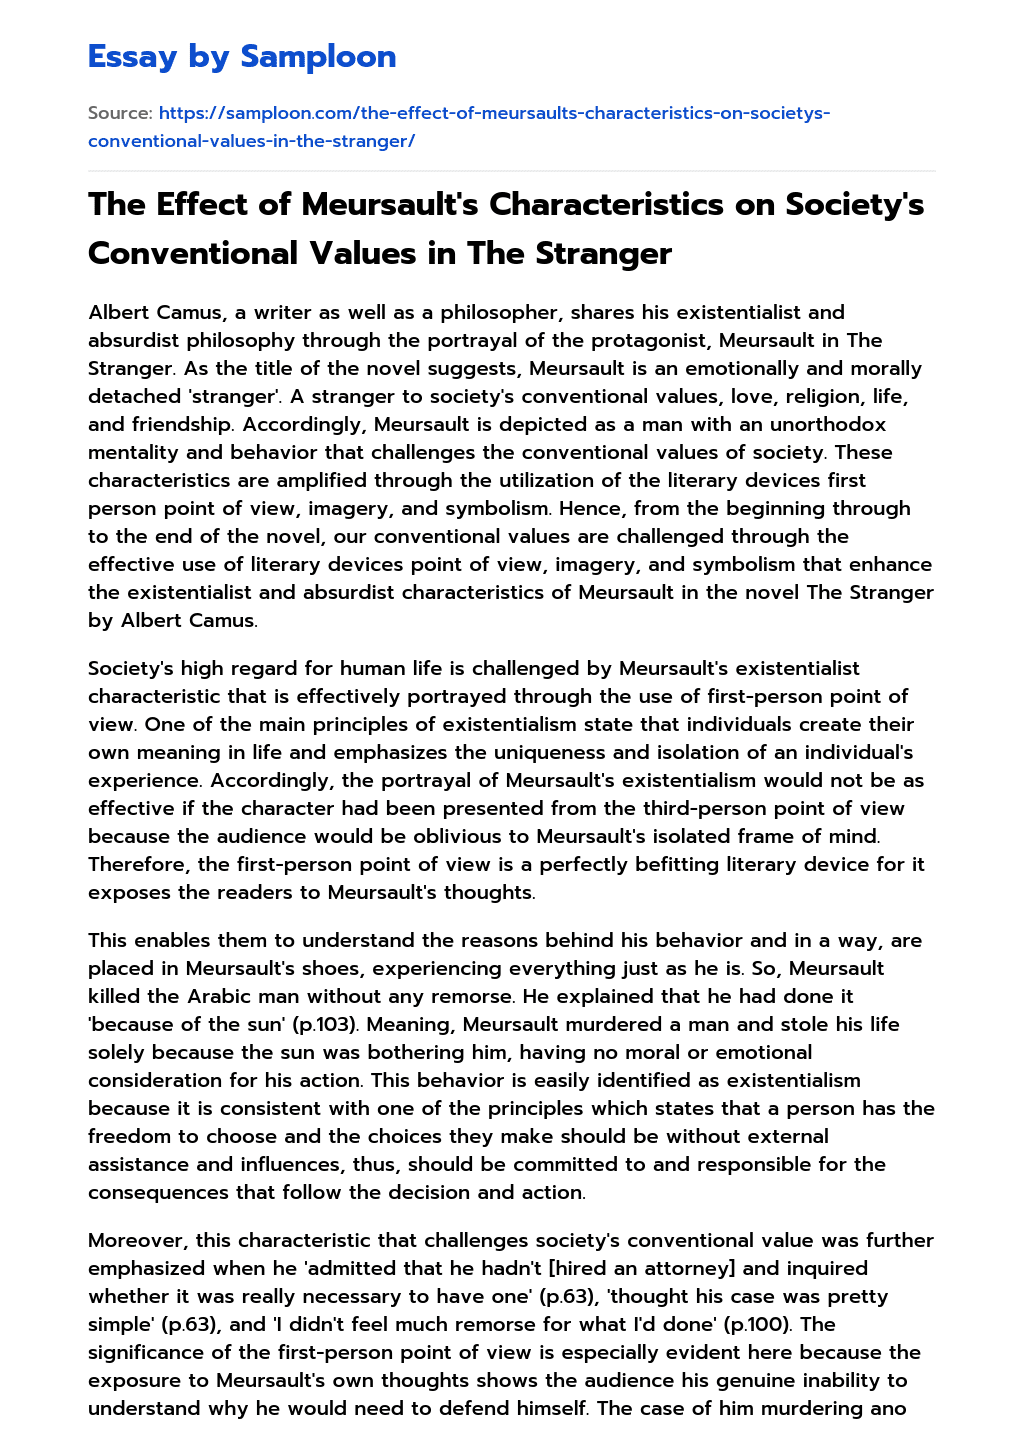 The Effect of Meursault’s Characteristics on Society’s Conventional Values in The Stranger Literary Analysis essay